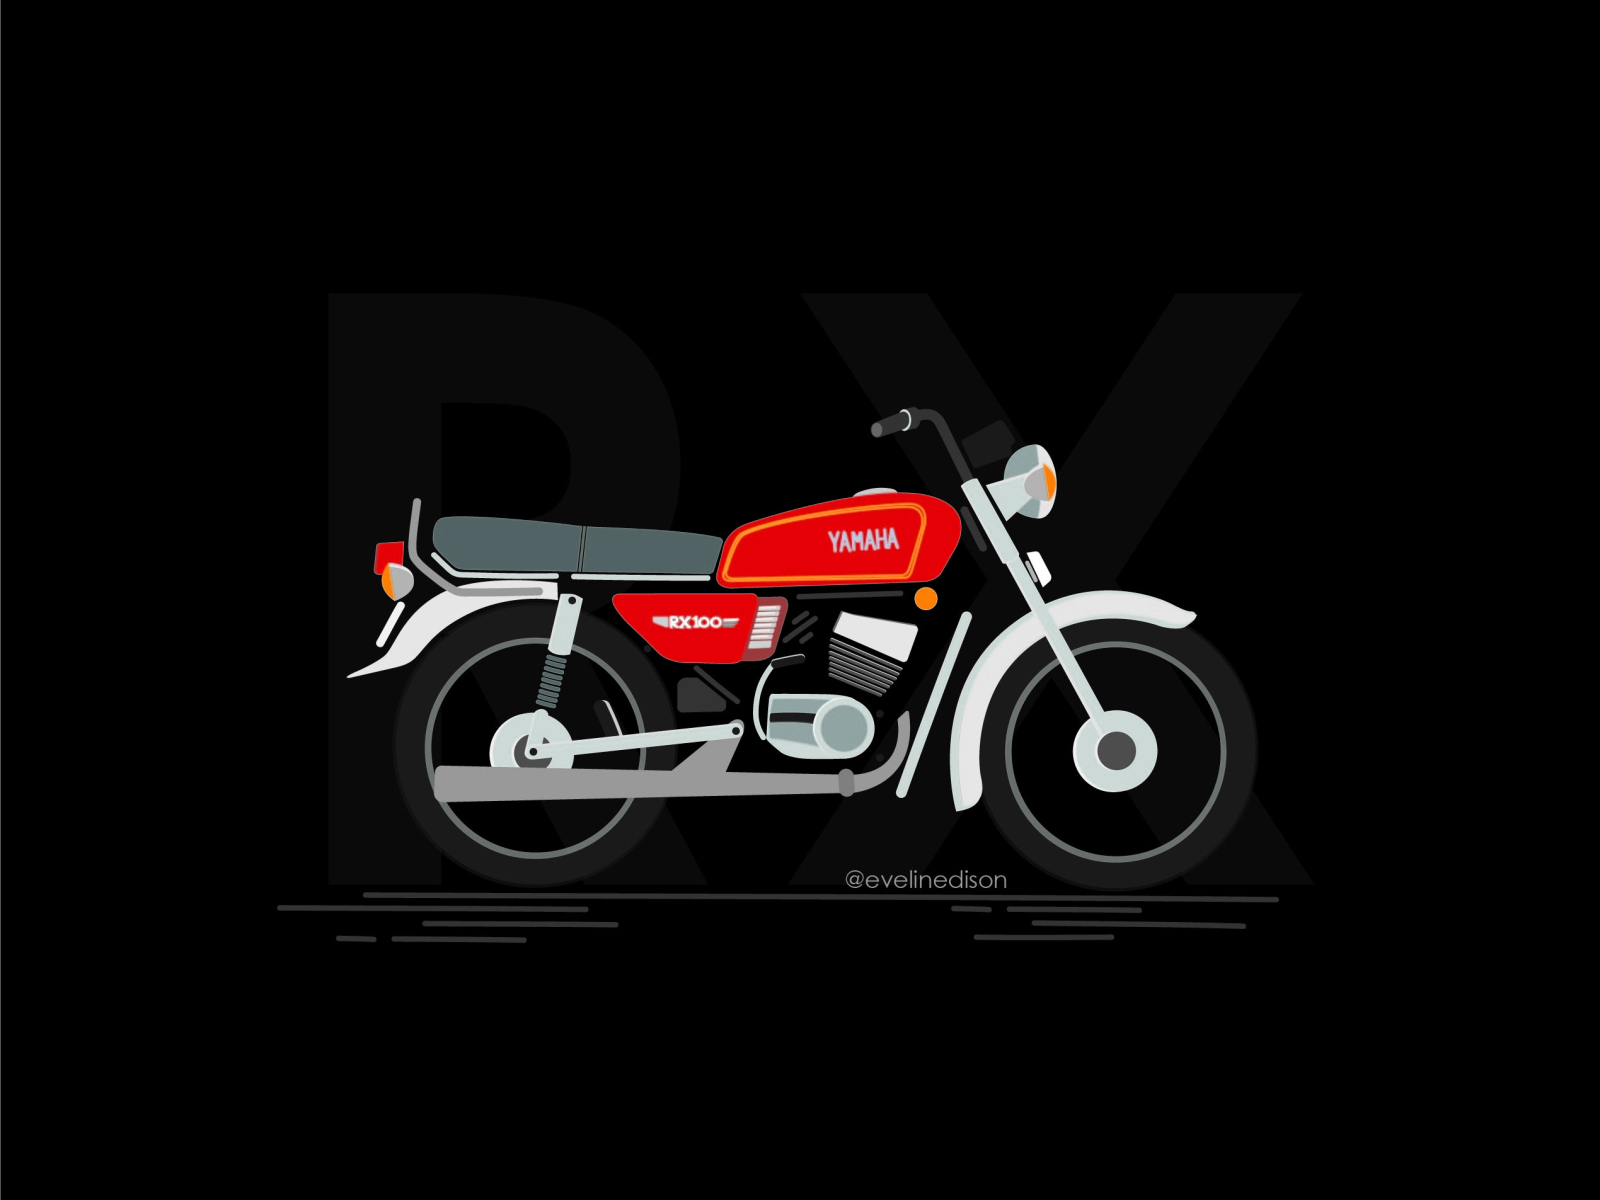 RX 100 by evelin edison on Dribbble